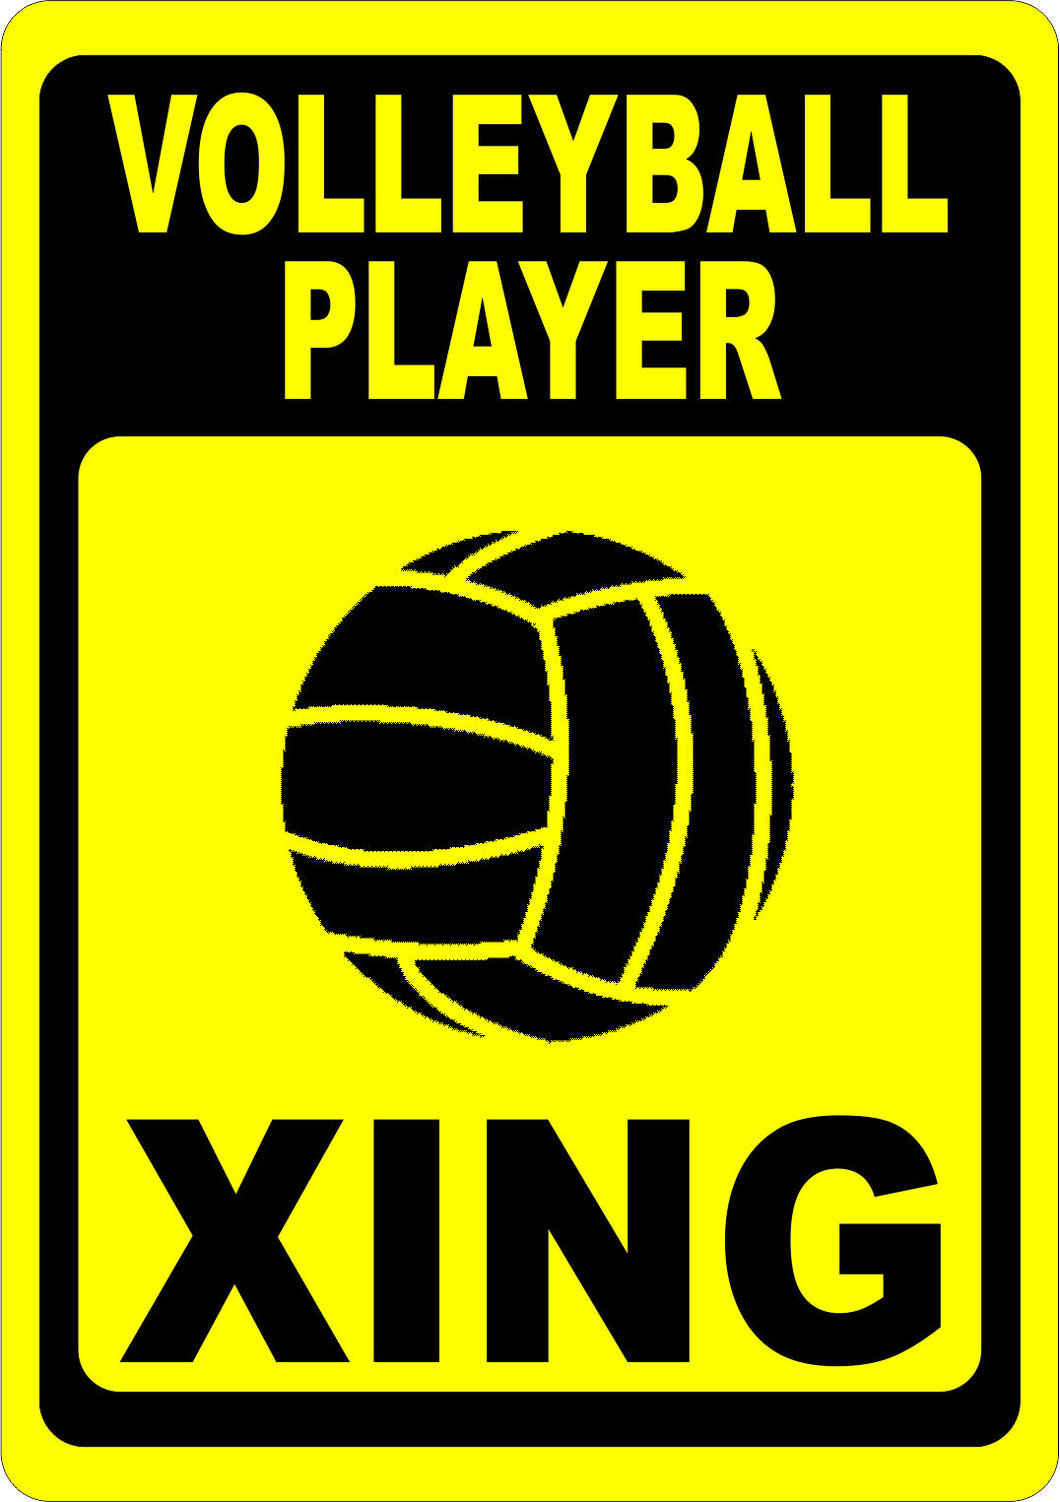 Volleyball Player Crossing Sign